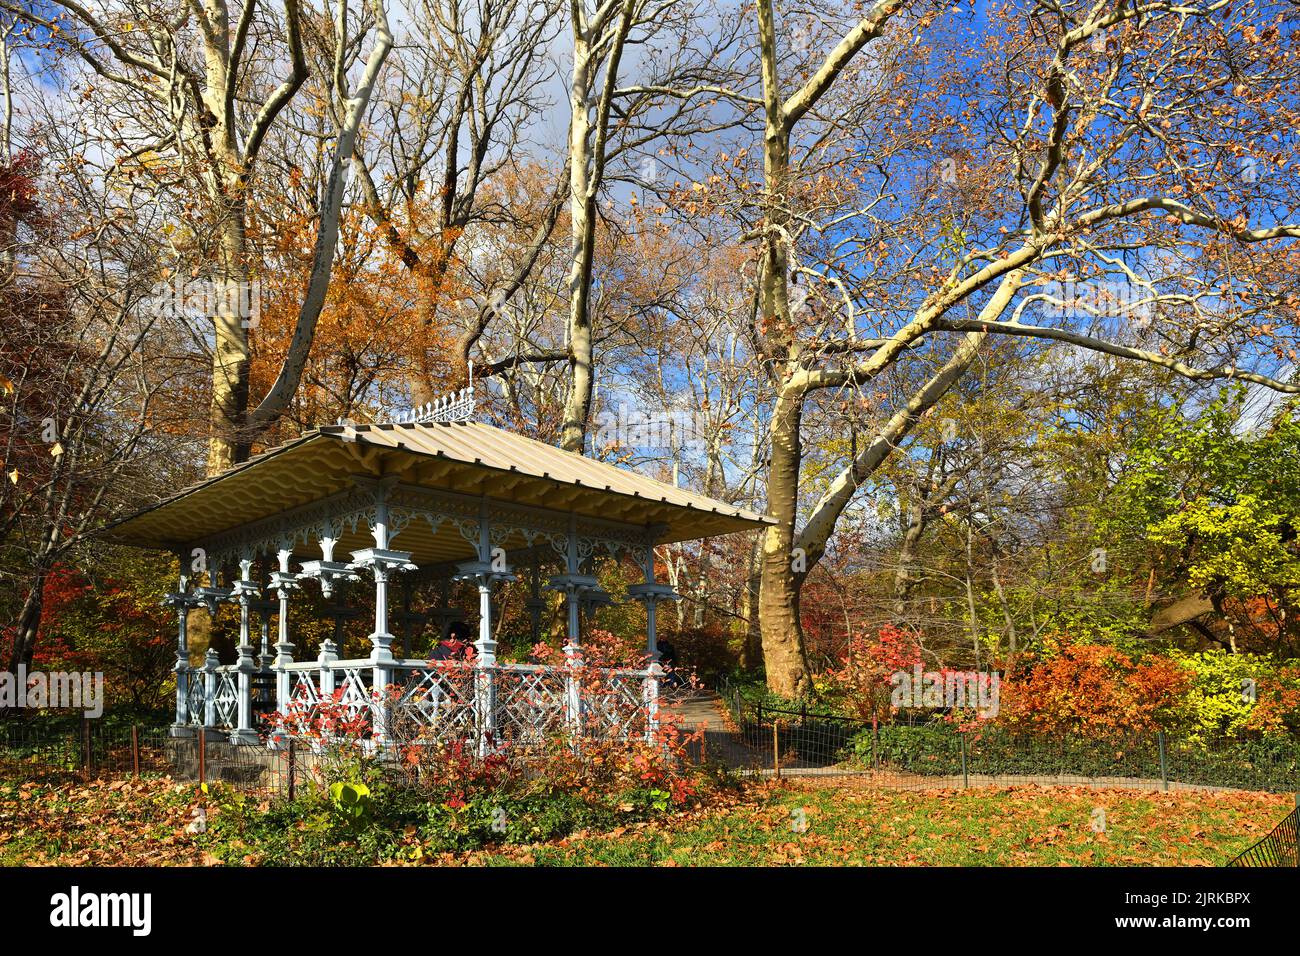 Wooden gazebo in Central park in picturesque autumn. New York City Stock Photo